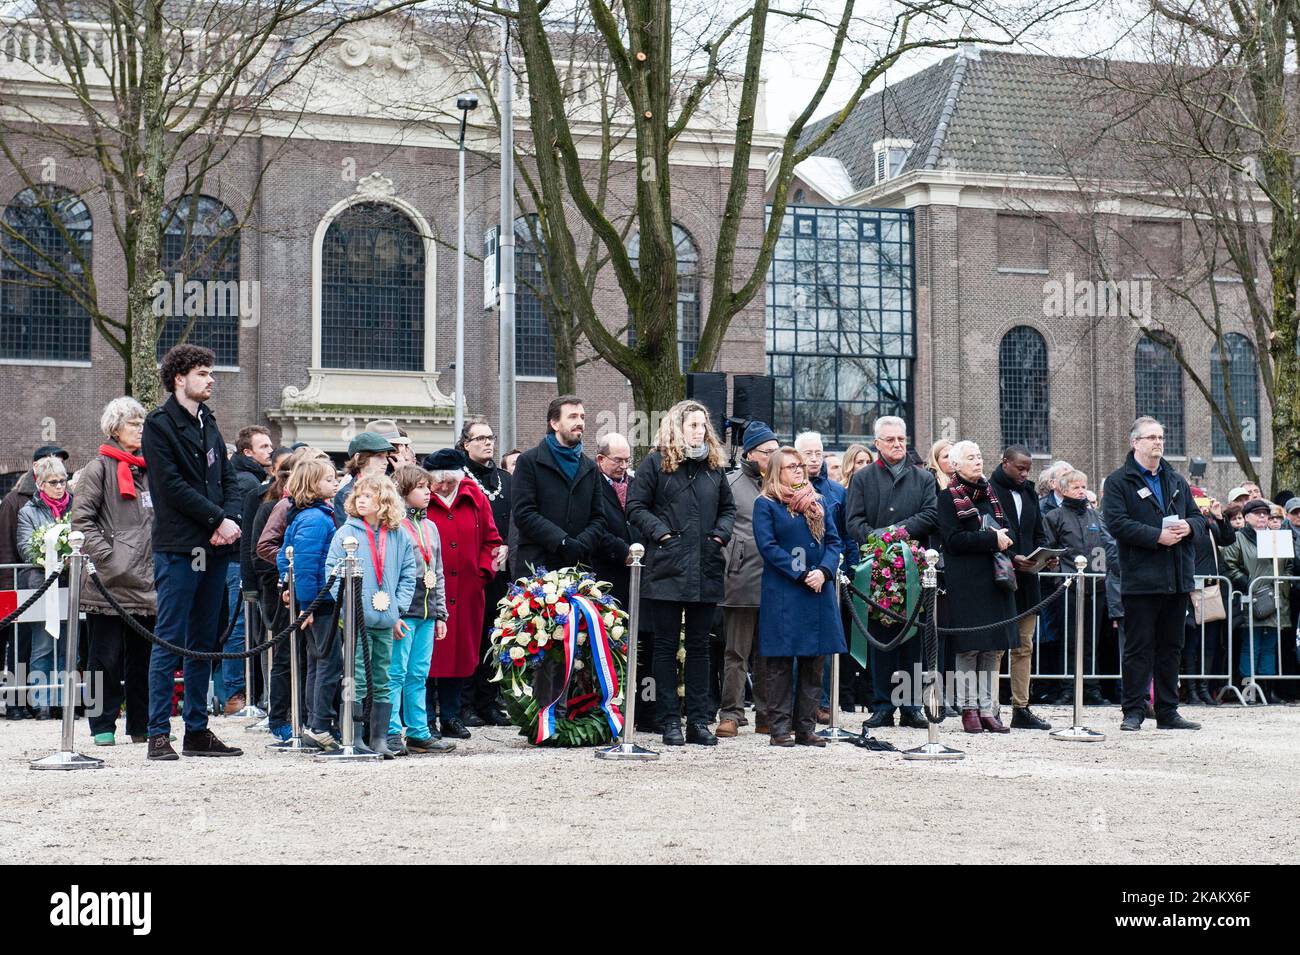 People take part at the commemoration of the Strike of February 1941 in Amsterdam, Netherlands, on 25 February 2017. The strike is remembered each year on 25 February in Amsterdam. The general strike, which is known as February Strike, began on 25 February 1941 in response to anti-Jewish measures the German occupiers of the Netherlands. The February Strike was called by the then illegal Dutch Communist Party, and Amsterdam dockworkers went on strike in solidarity with the 425 Jews arrested by the Germans previously and deported to the Mauthausen concentration camp in Austria. The February Stri Stock Photo